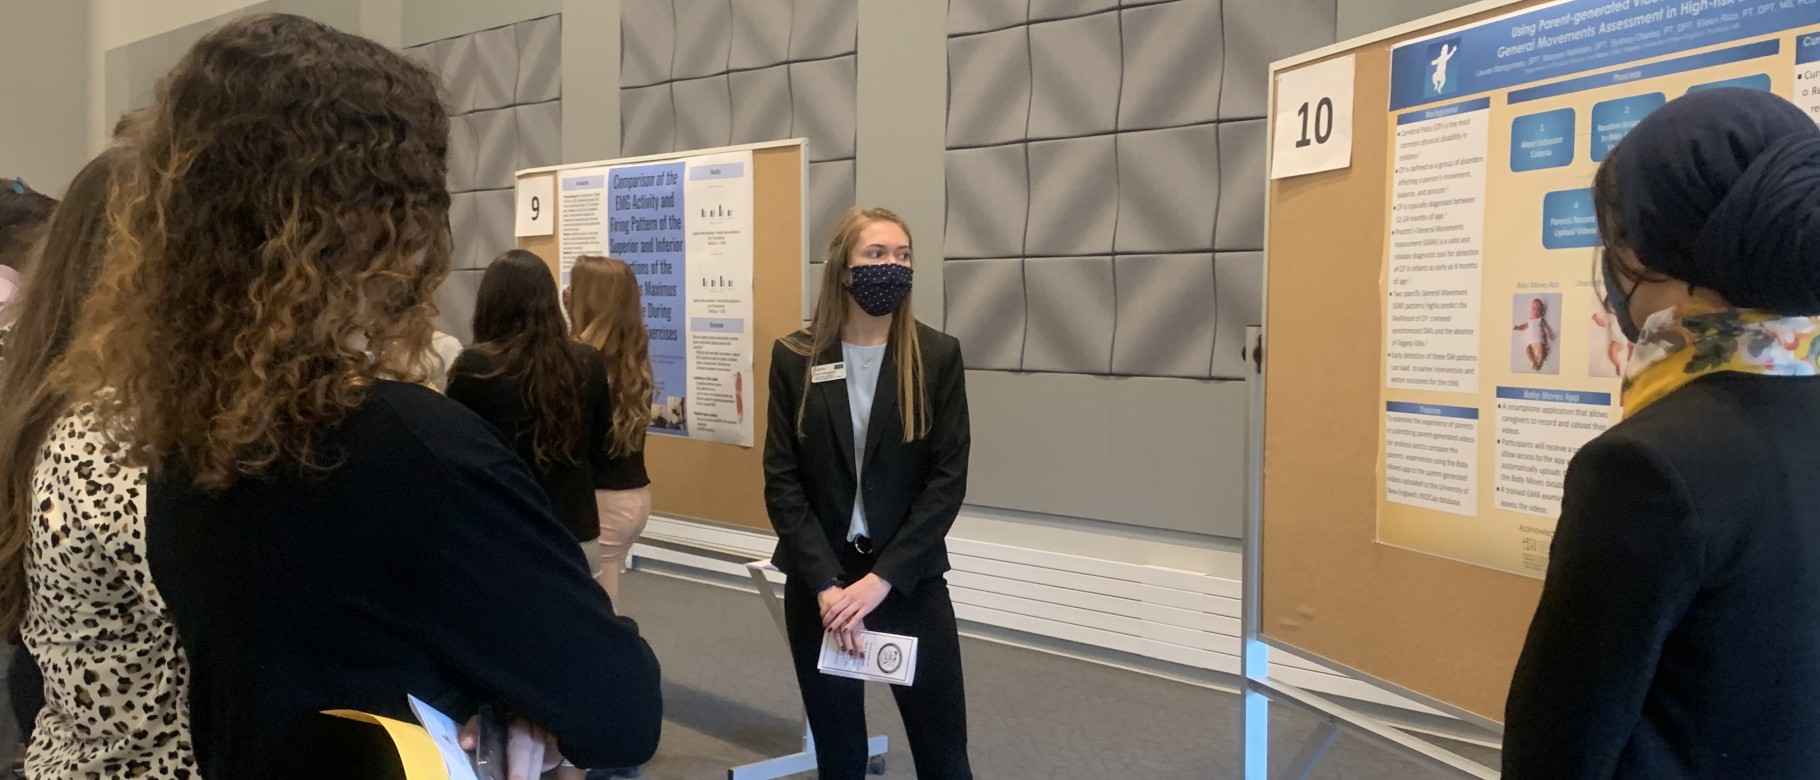 Female student presents research poster to small crowd